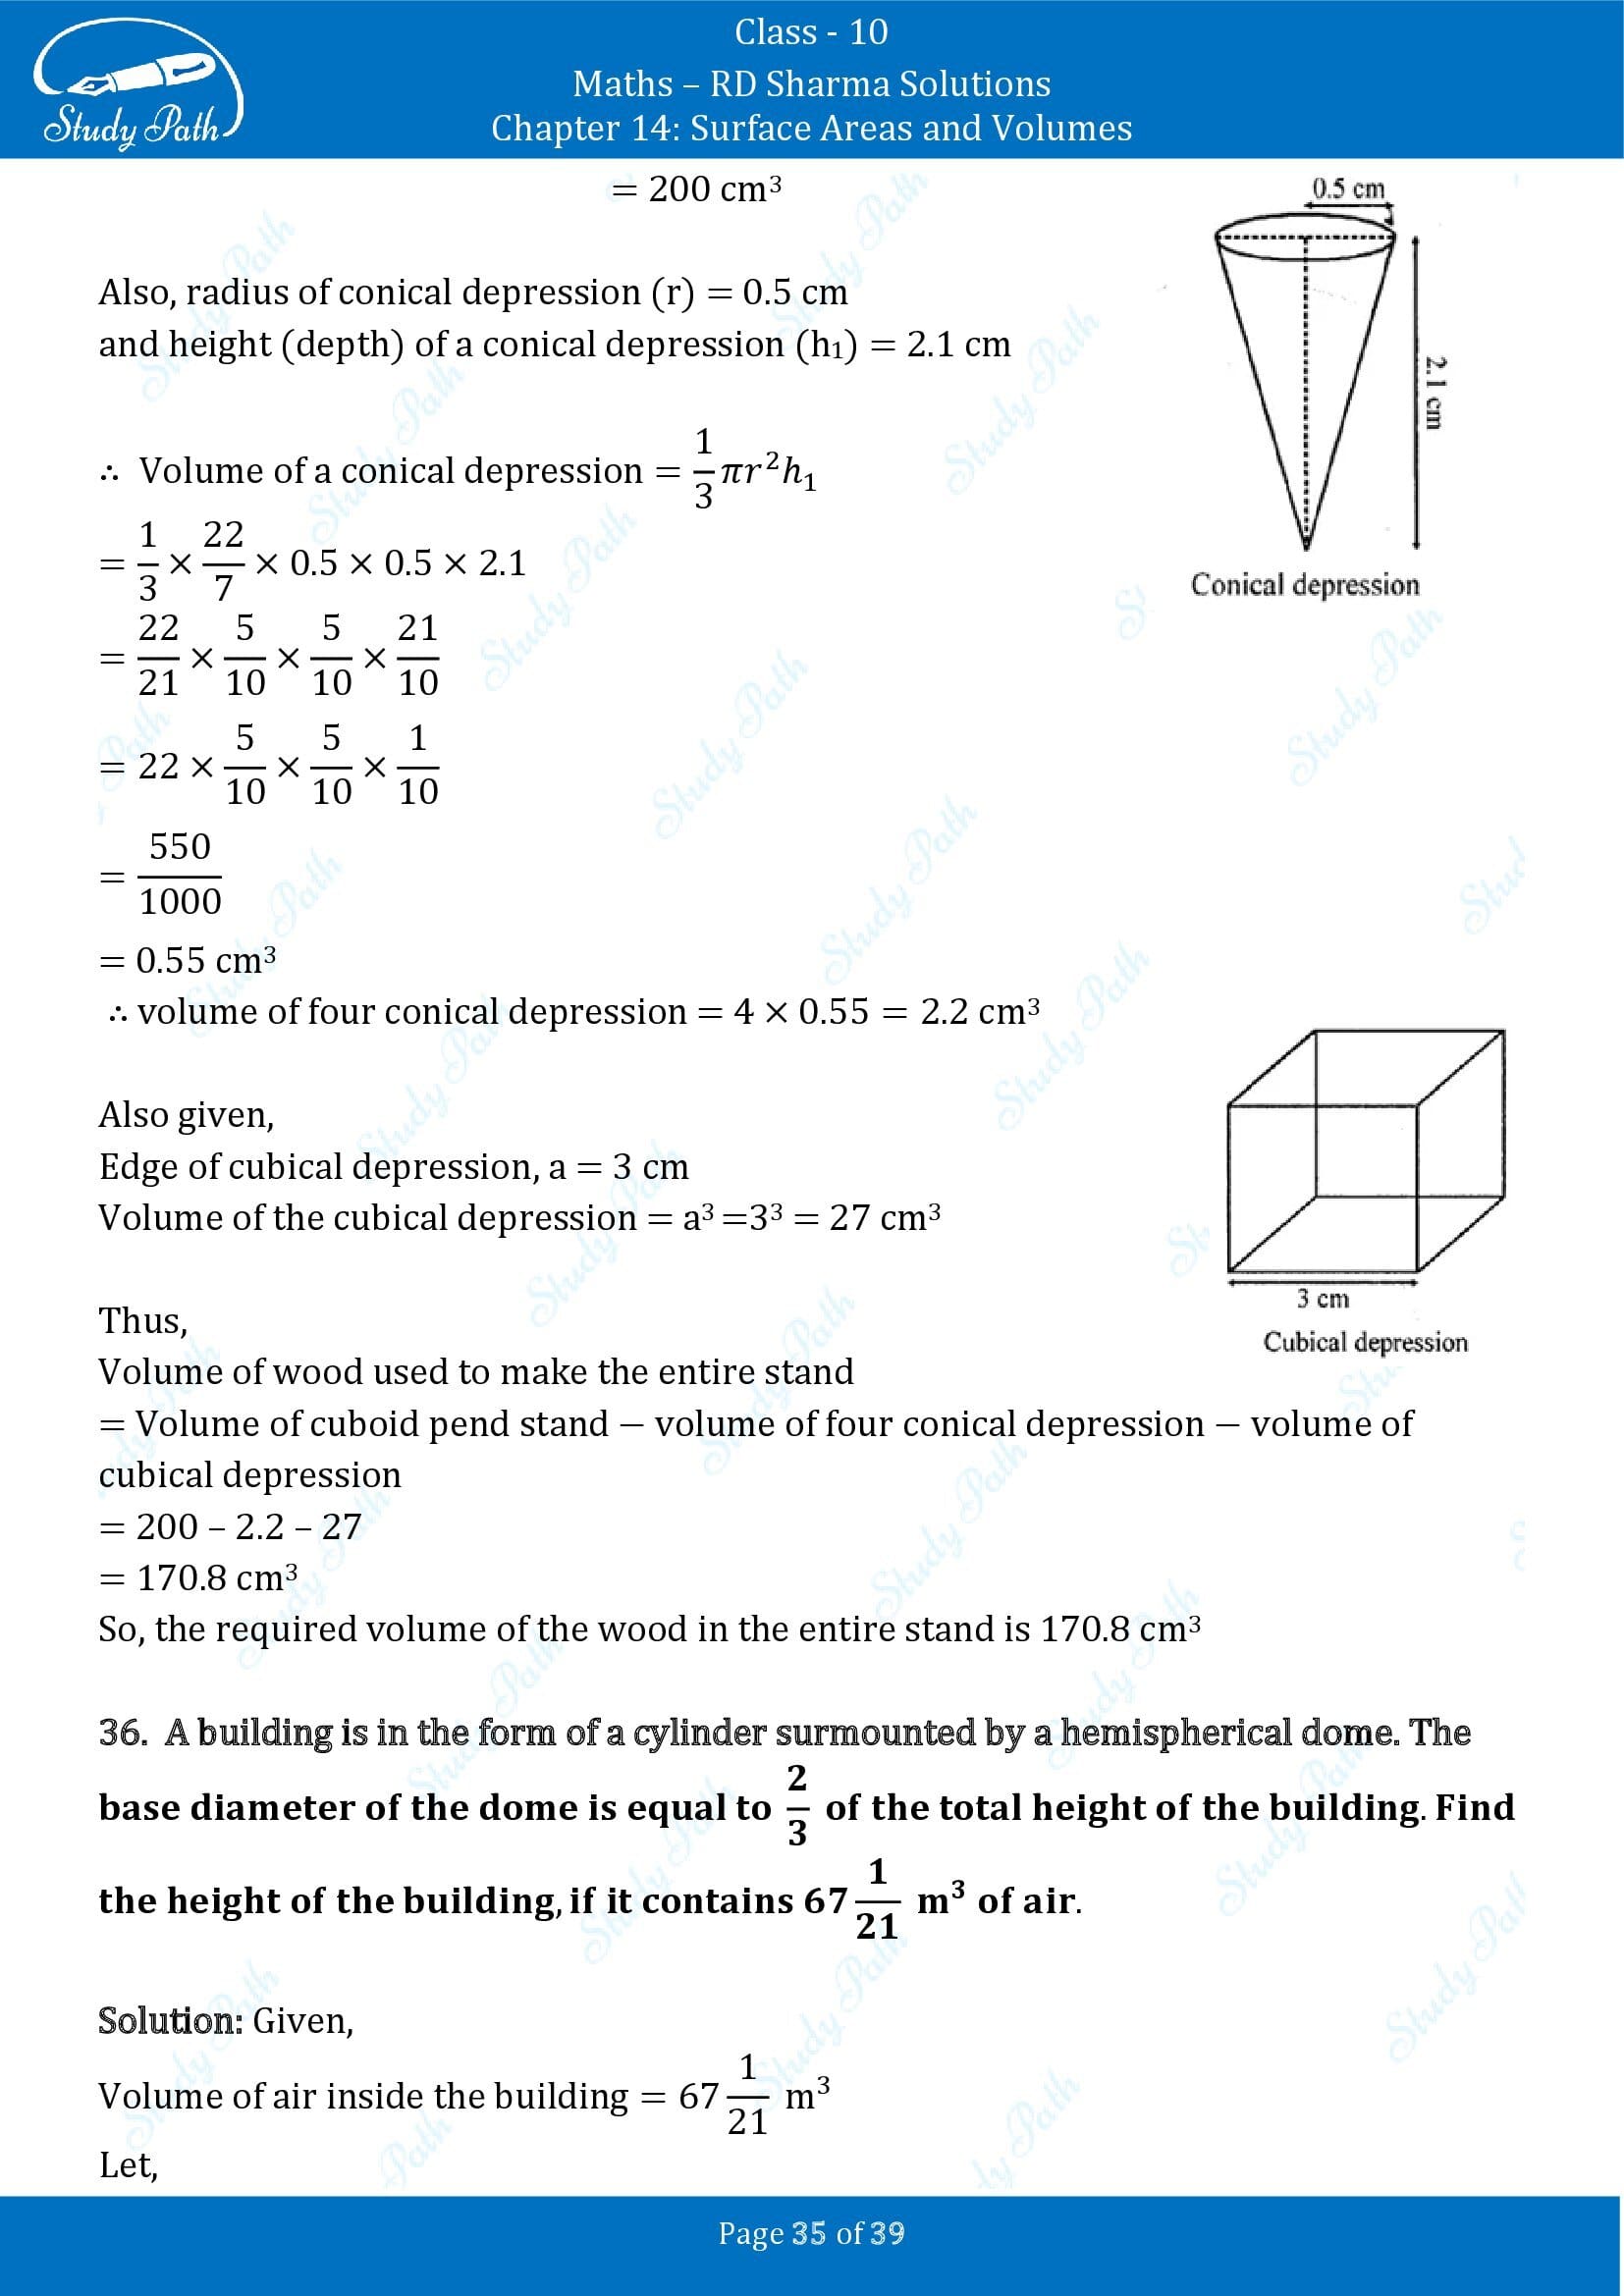 RD Sharma Solutions Class 10 Chapter 14 Surface Areas and Volumes Exercise 14.2 00035